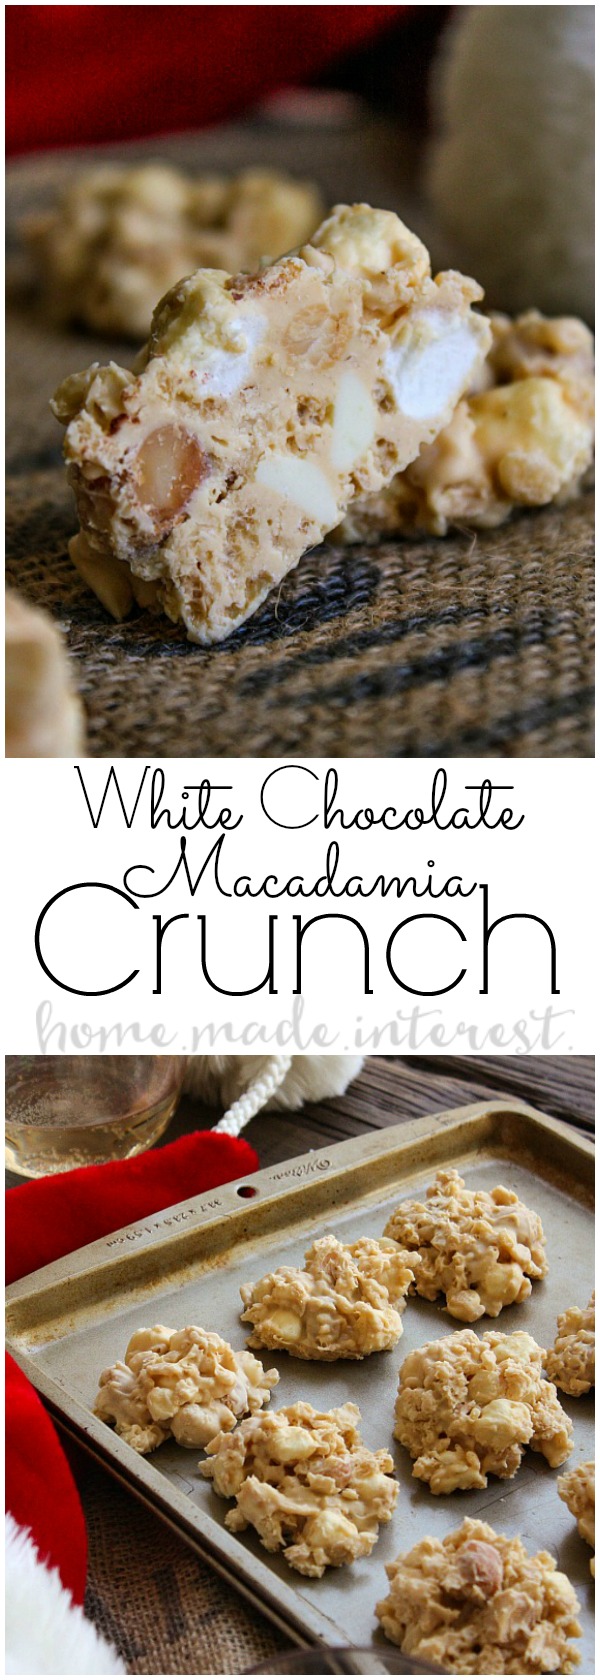 This easy no bake White Chocolate Macadamia Crunch is a simple cookie recipe for the hectic holidays! White chocolate, peanut butter, macadamia nuts, and rice krispies come together to make an easy dessert recipe for Thanksgiving, Christmas, or just one of those days. 